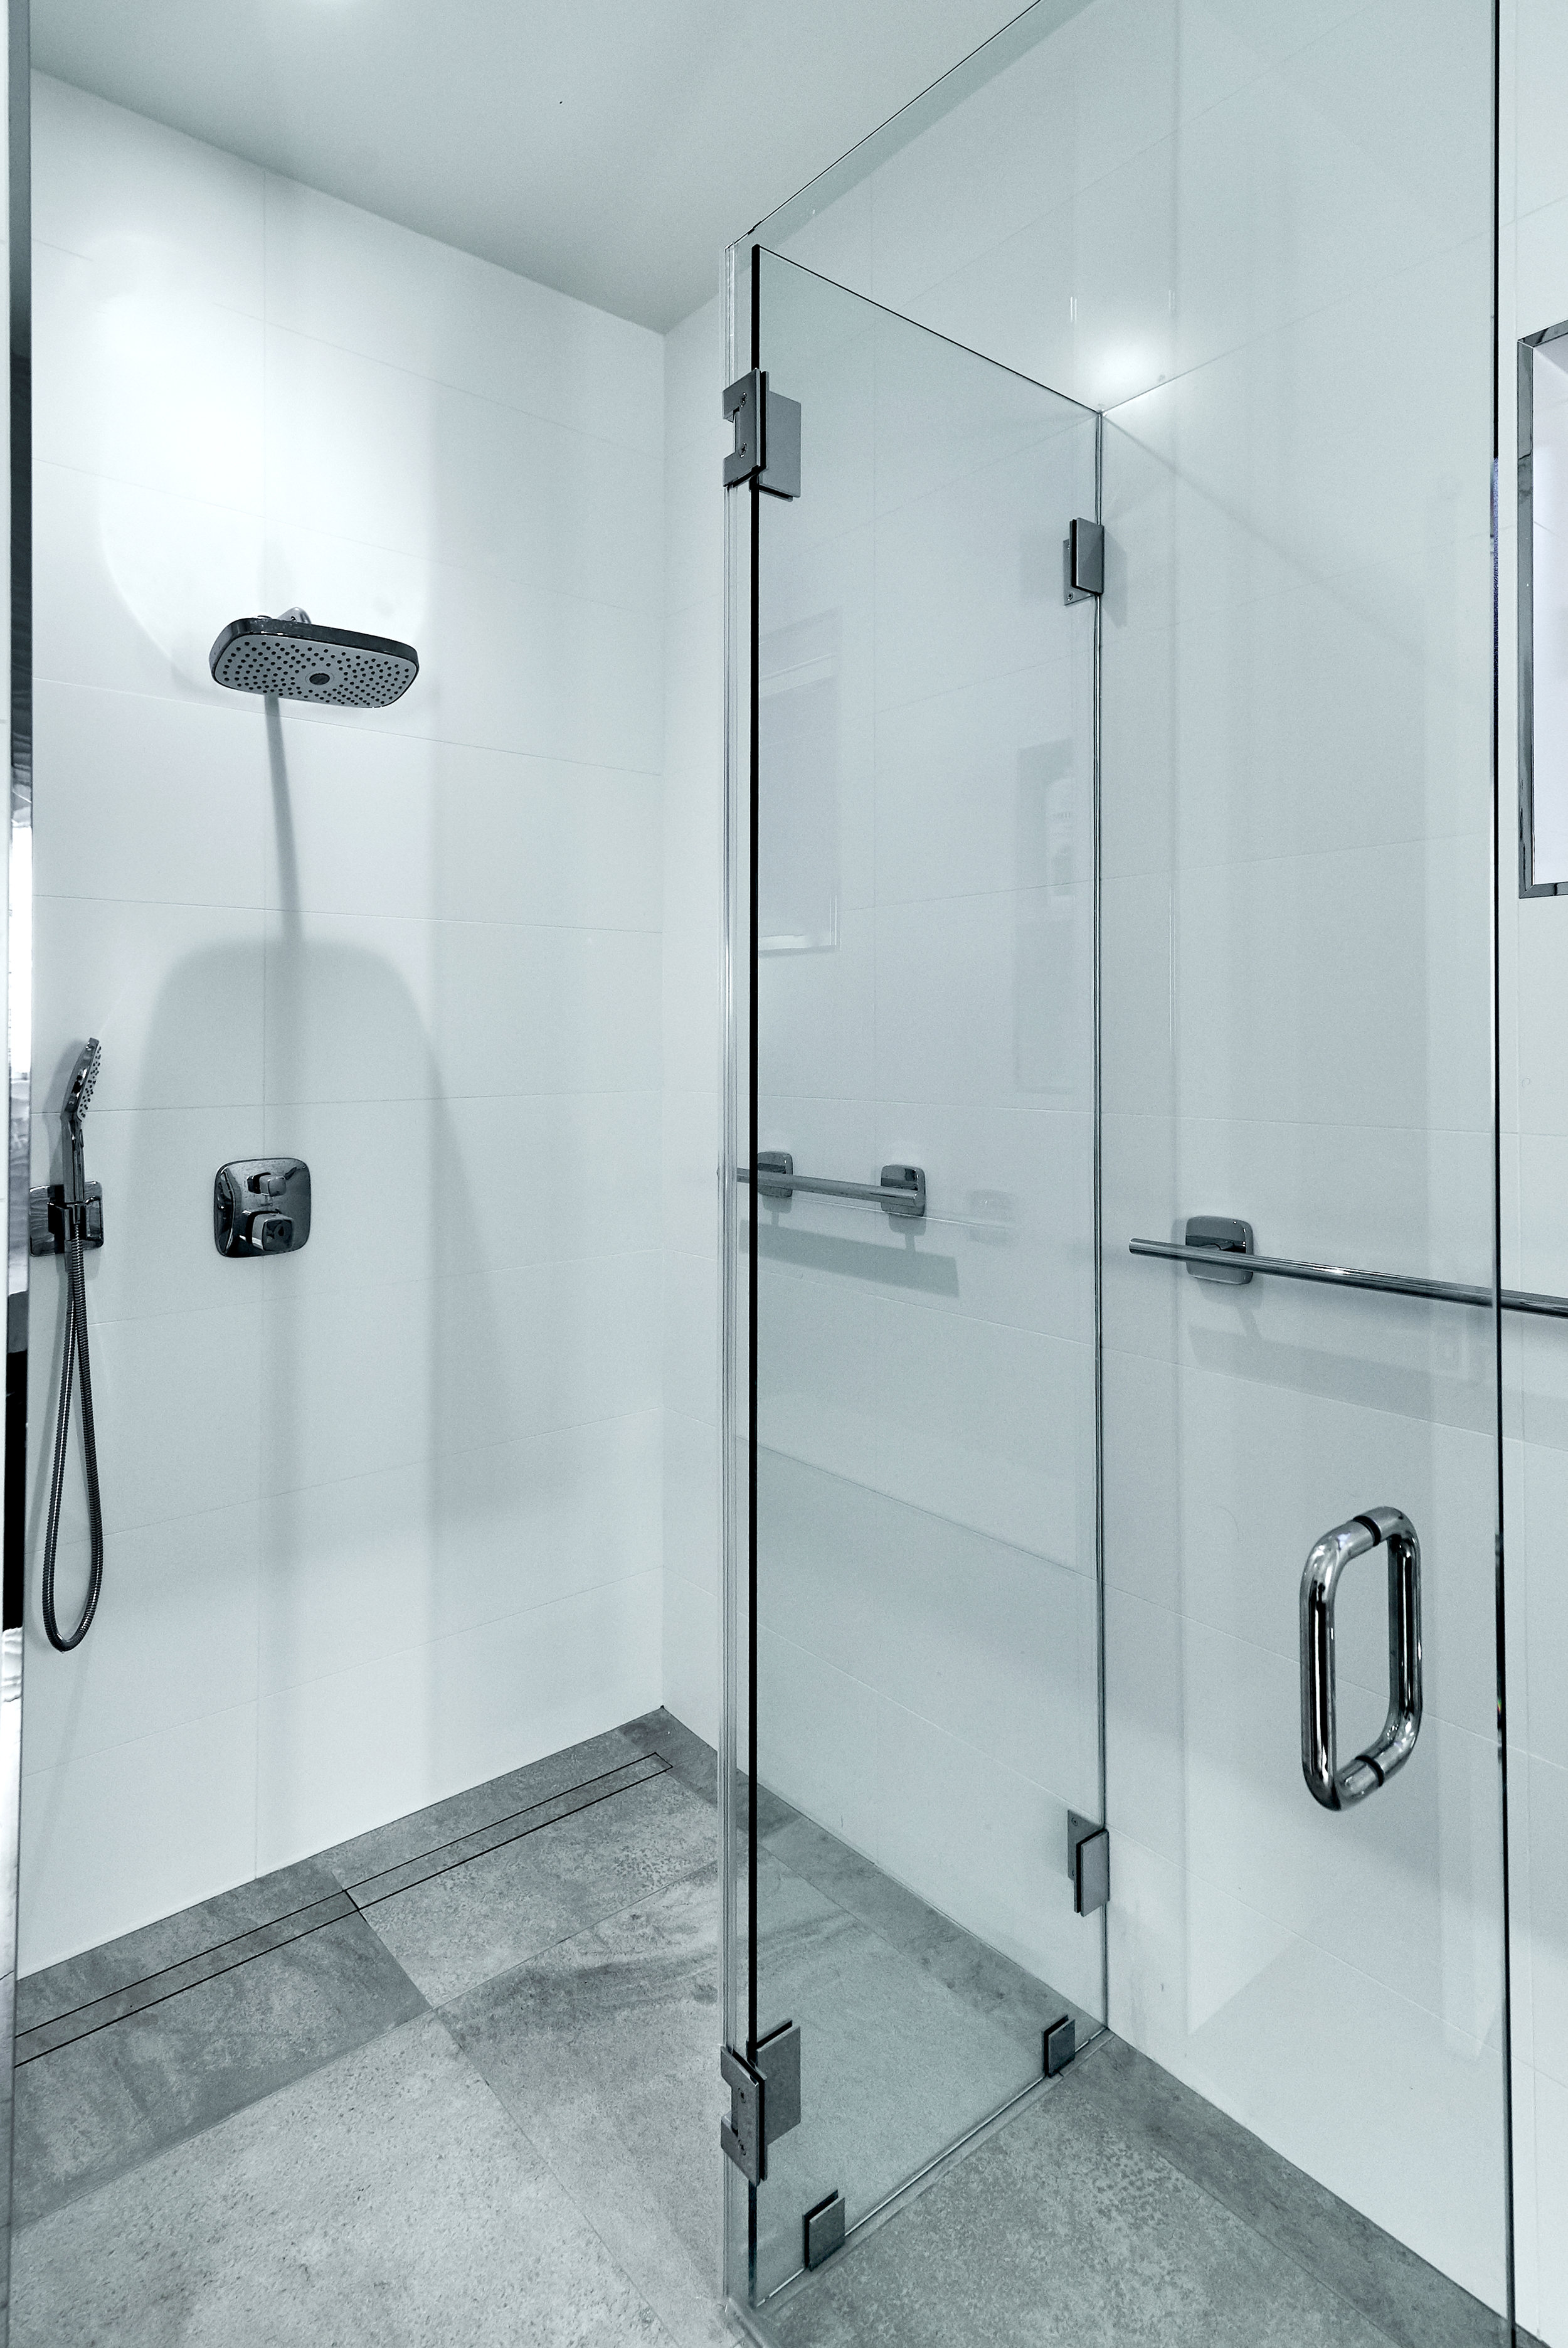 CURBLESS SHOWERS FOR ACCESSIBILITY